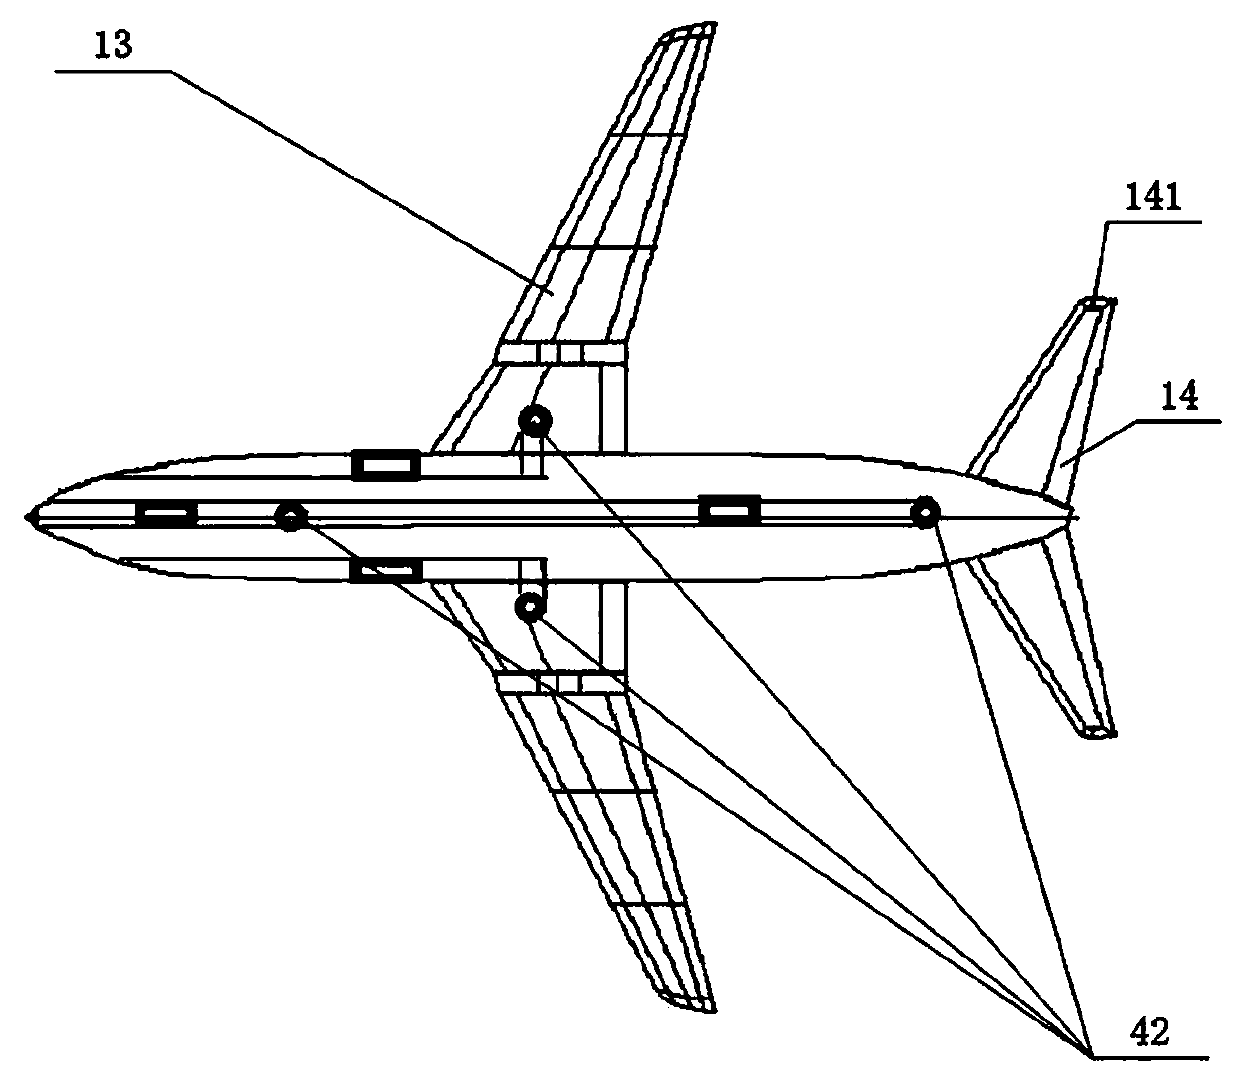 Model and method for allowing model to fly or dive